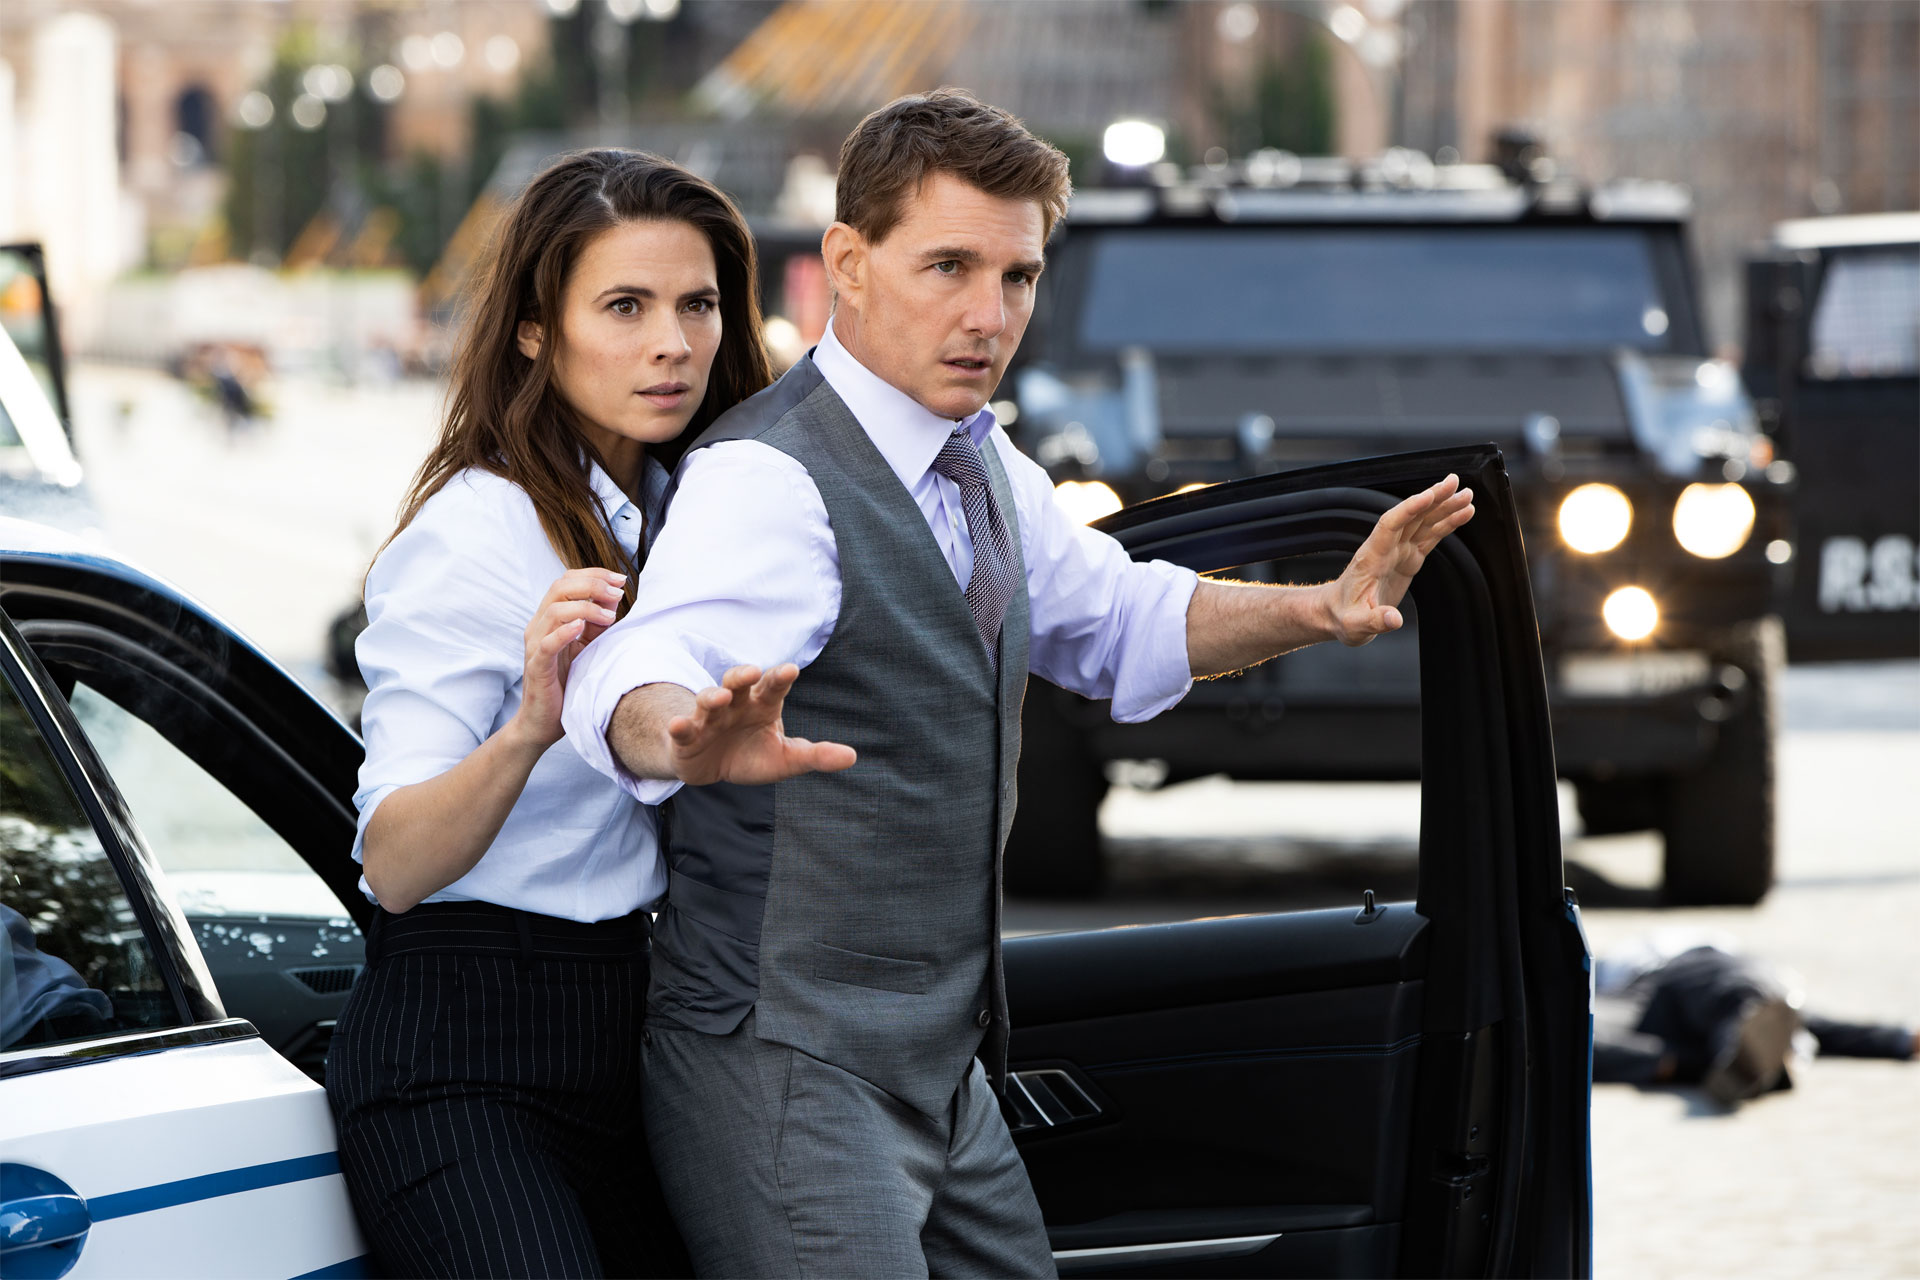 Hayley Atwell & Tom Cruise in Mission Impossible 7 - film still